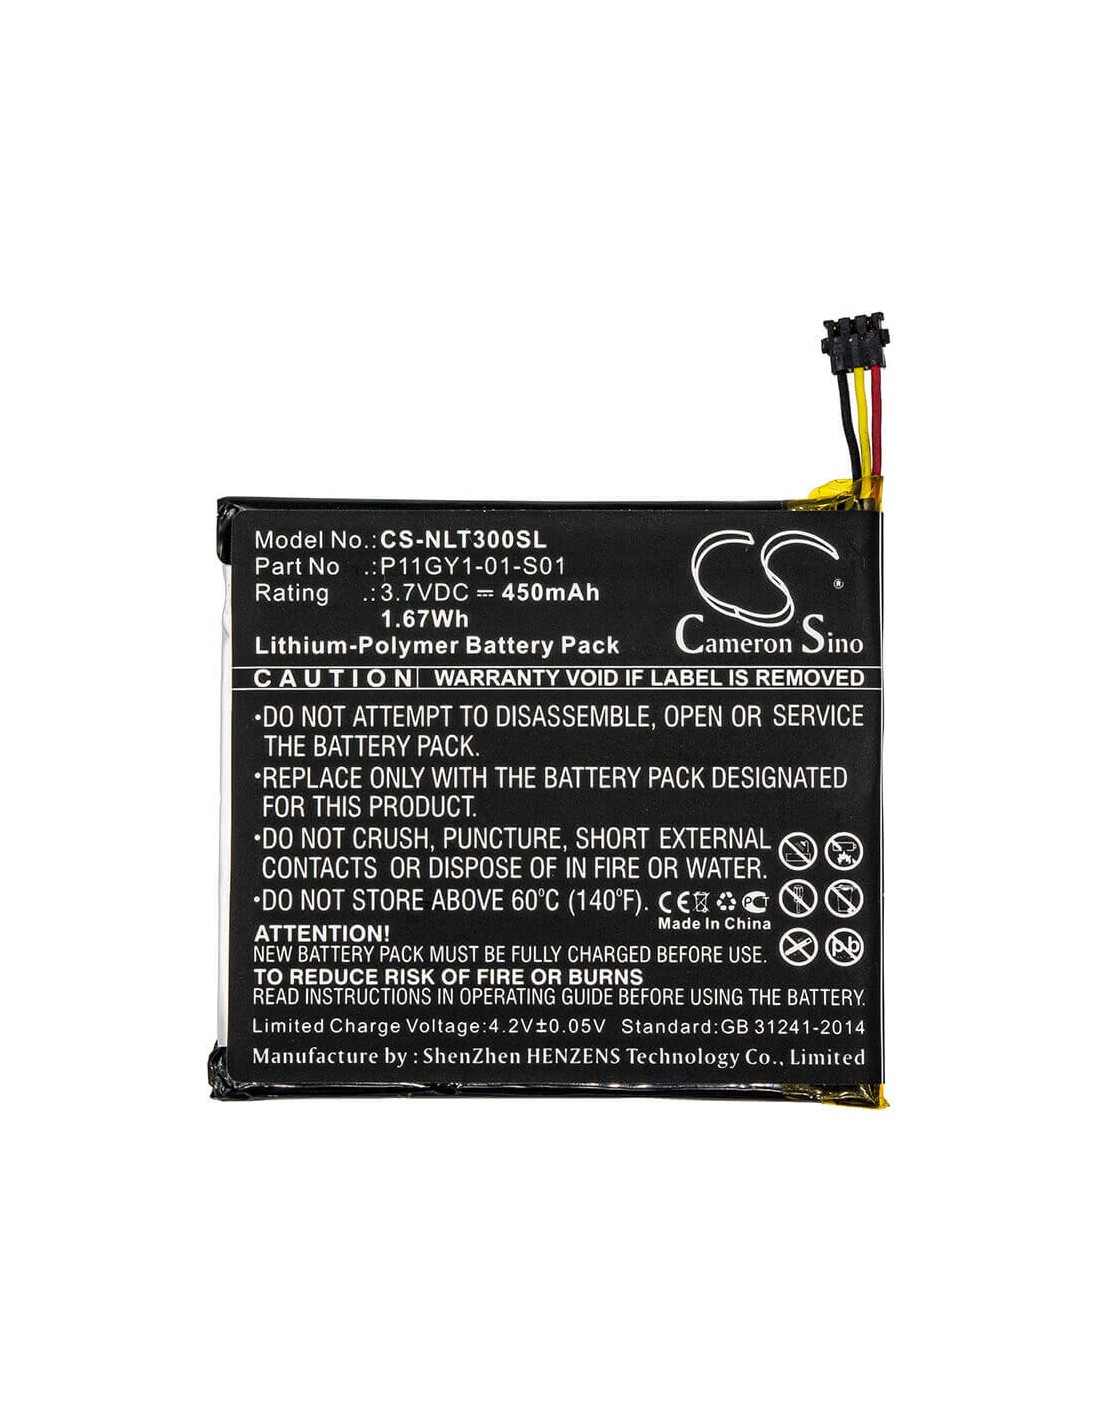 Battery for Nest, Learning Thermostat 3rd Generation 3.7V, 450mAh - 1.67Wh